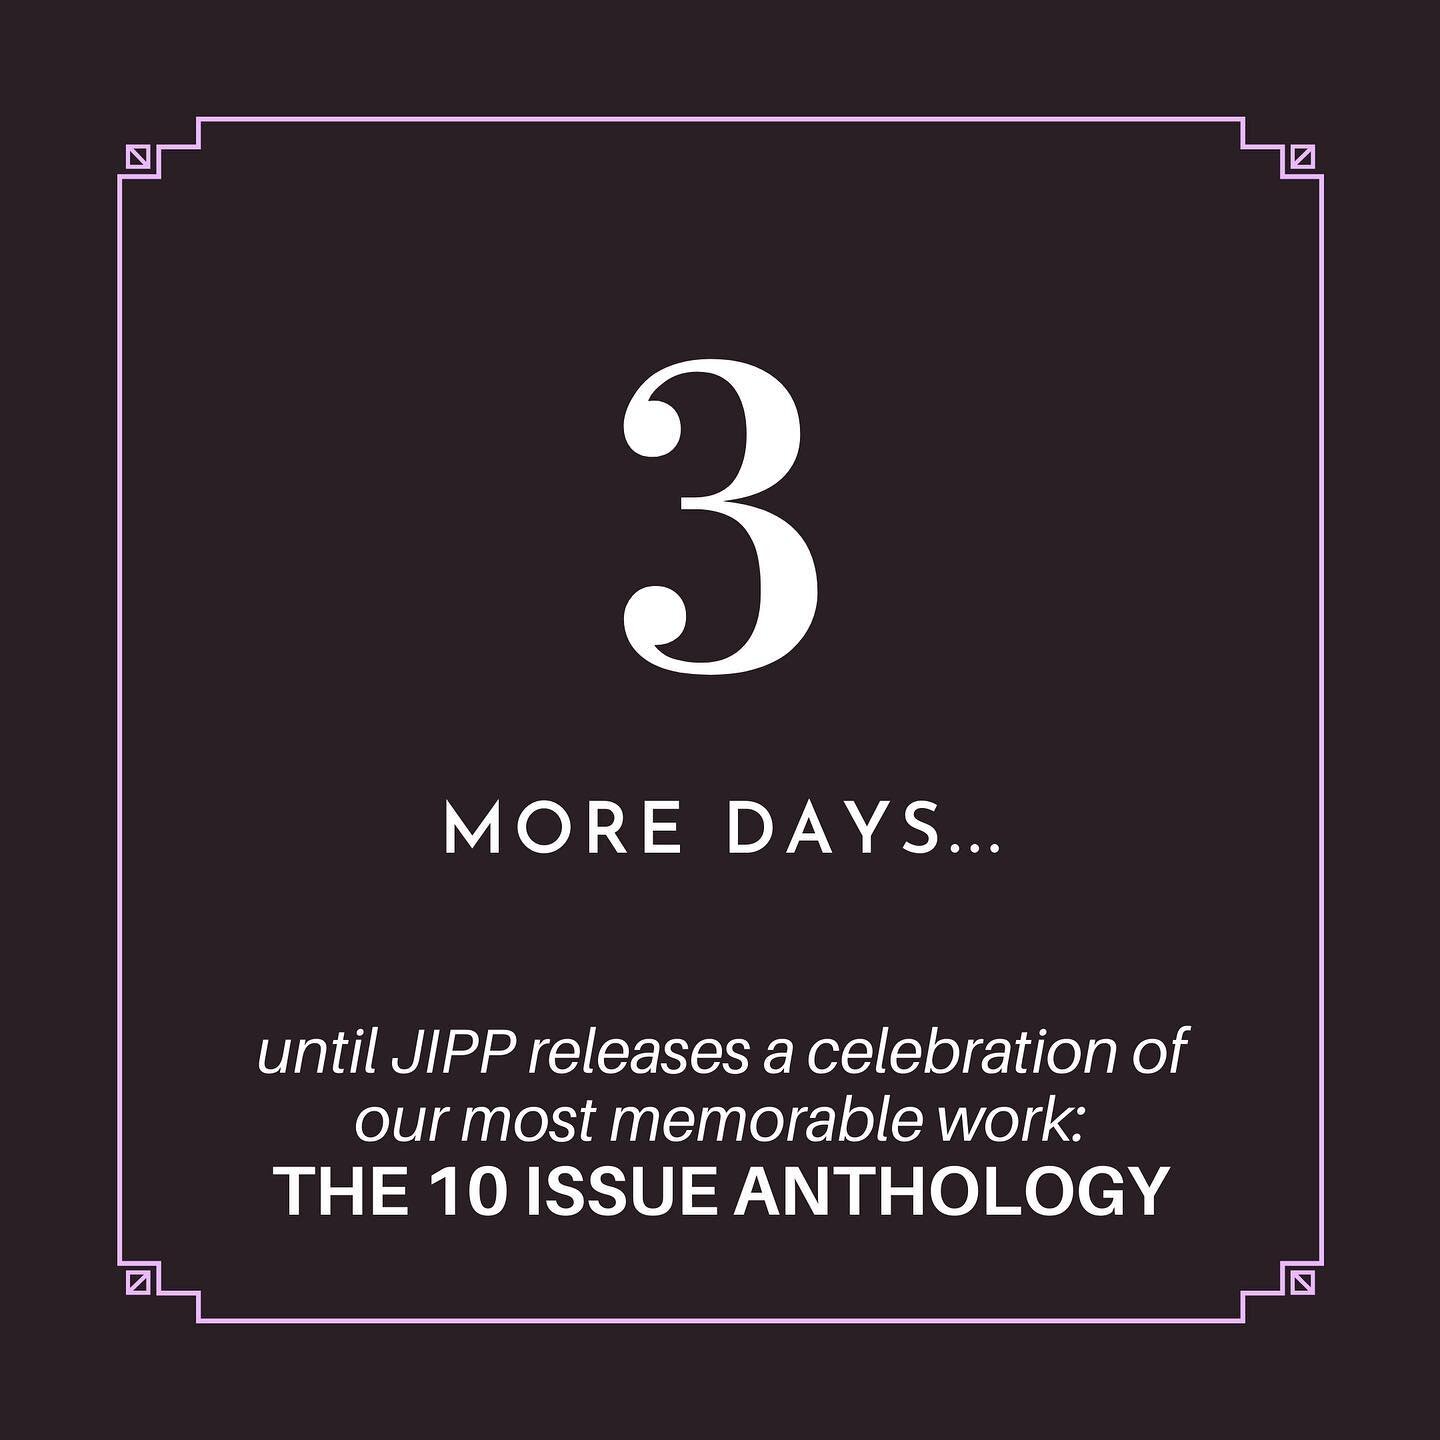 New issue out in three days! To celebrate ten issues, we&rsquo;re bringing back ten of our favorite pieces! 

The Journal of Interdisciplinary Public Policy is a journal aimed at elevating student voices on current policy issues. Learn more at www.ji